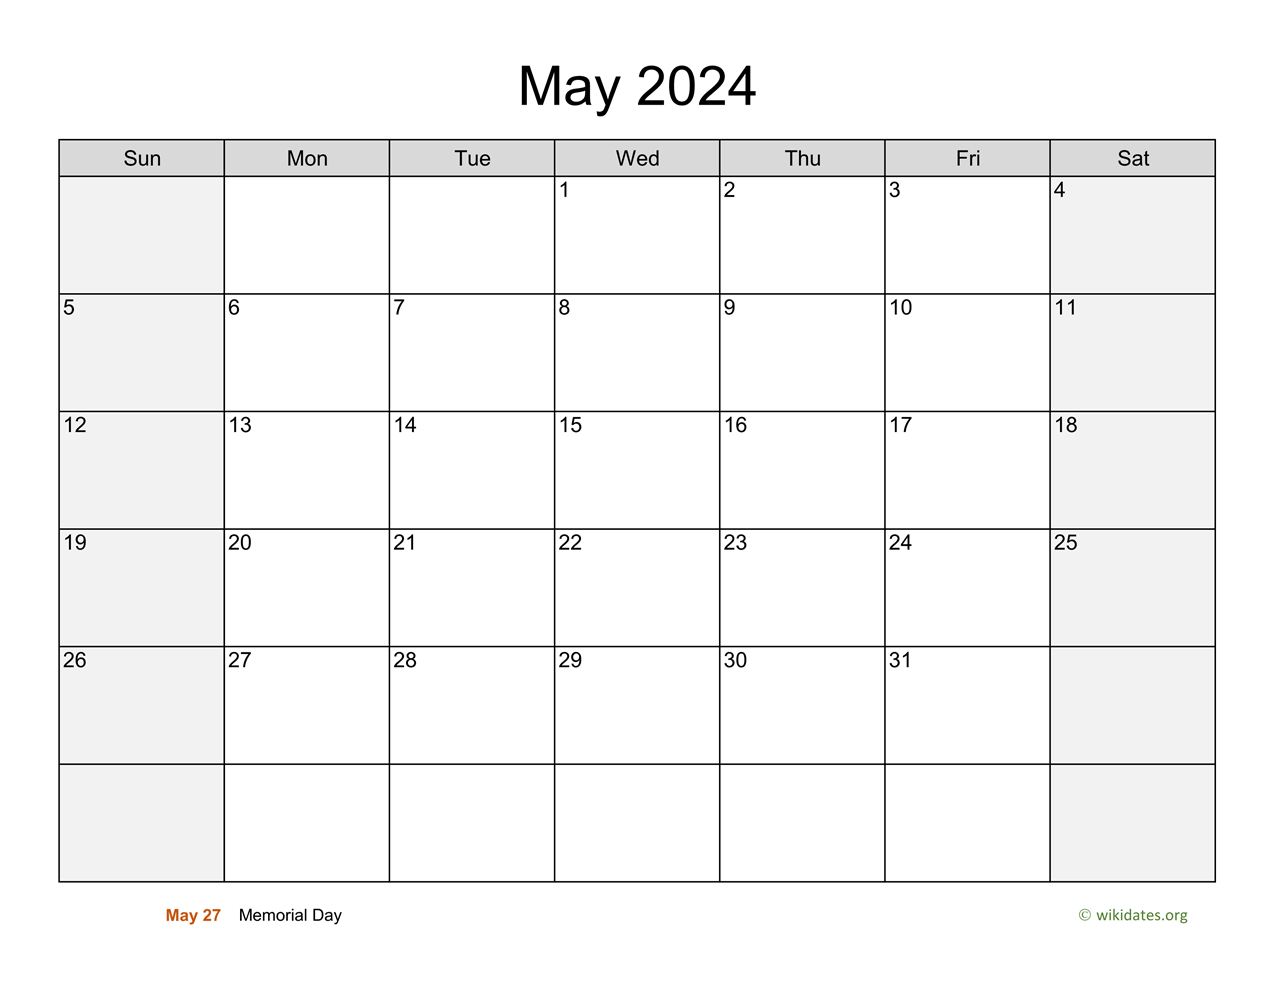 May 2024 Calendar with Weekend Shaded